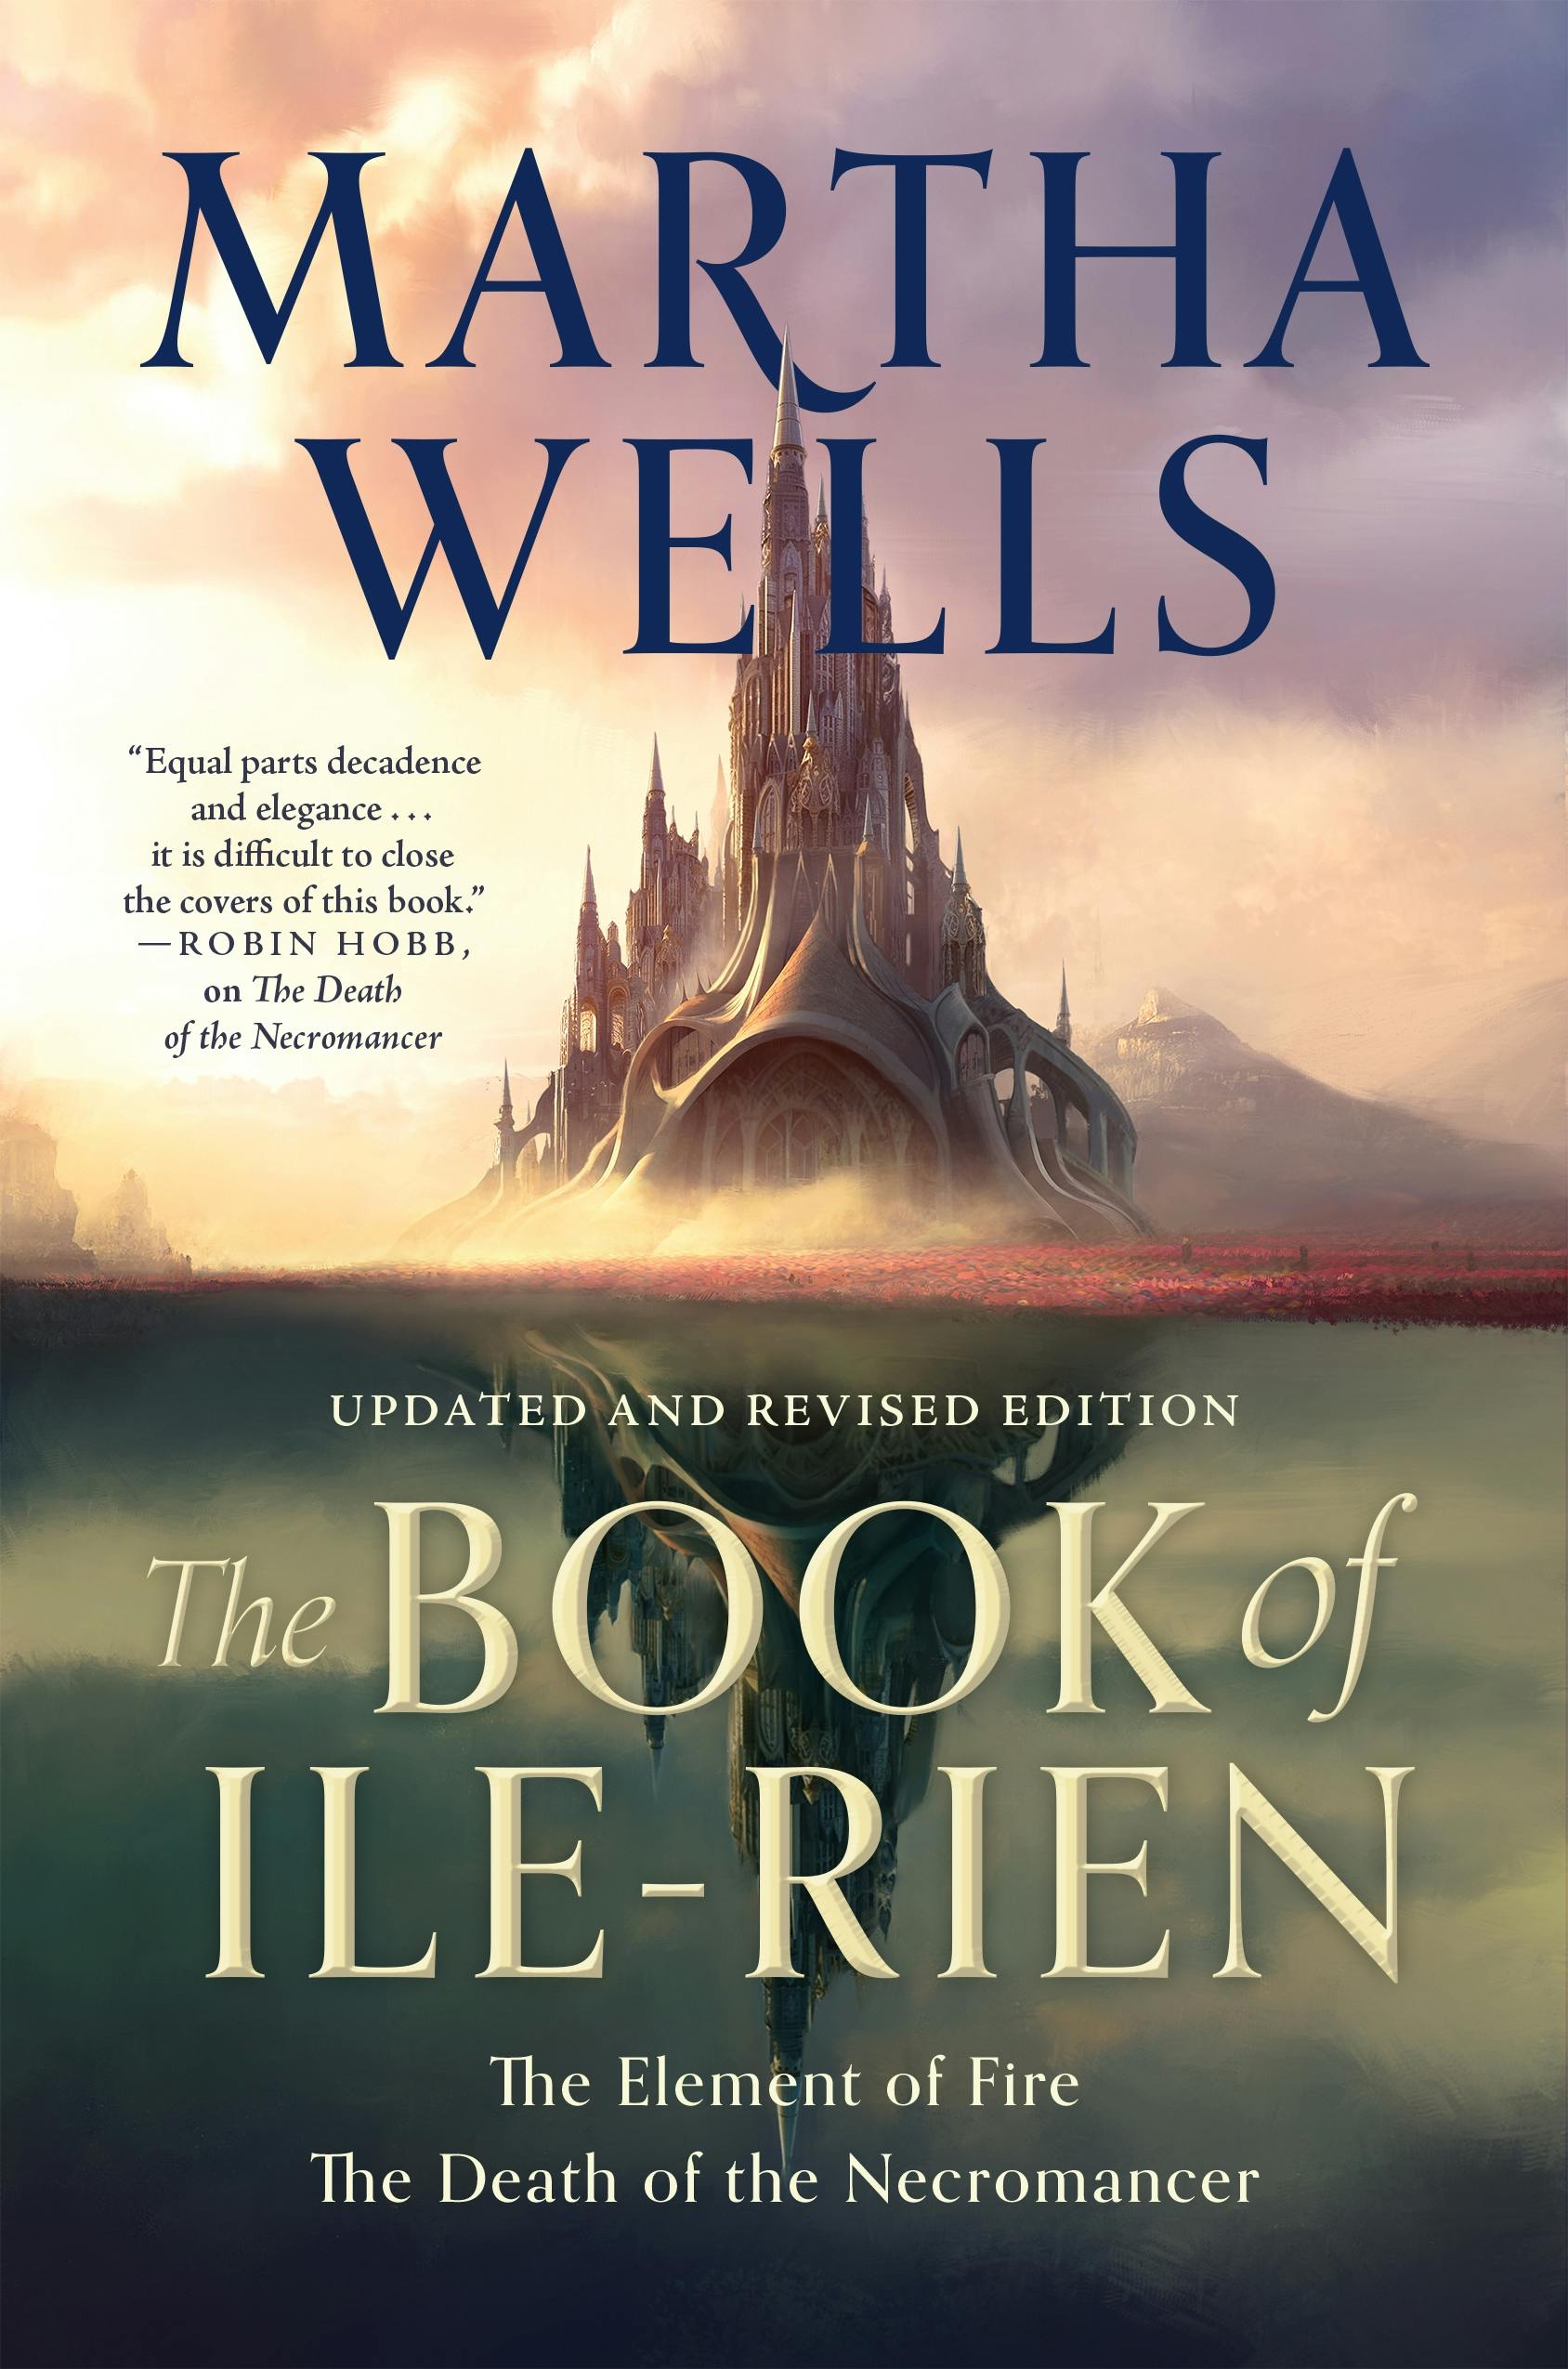 Cover for the book titled as: The Book of Ile-Rien